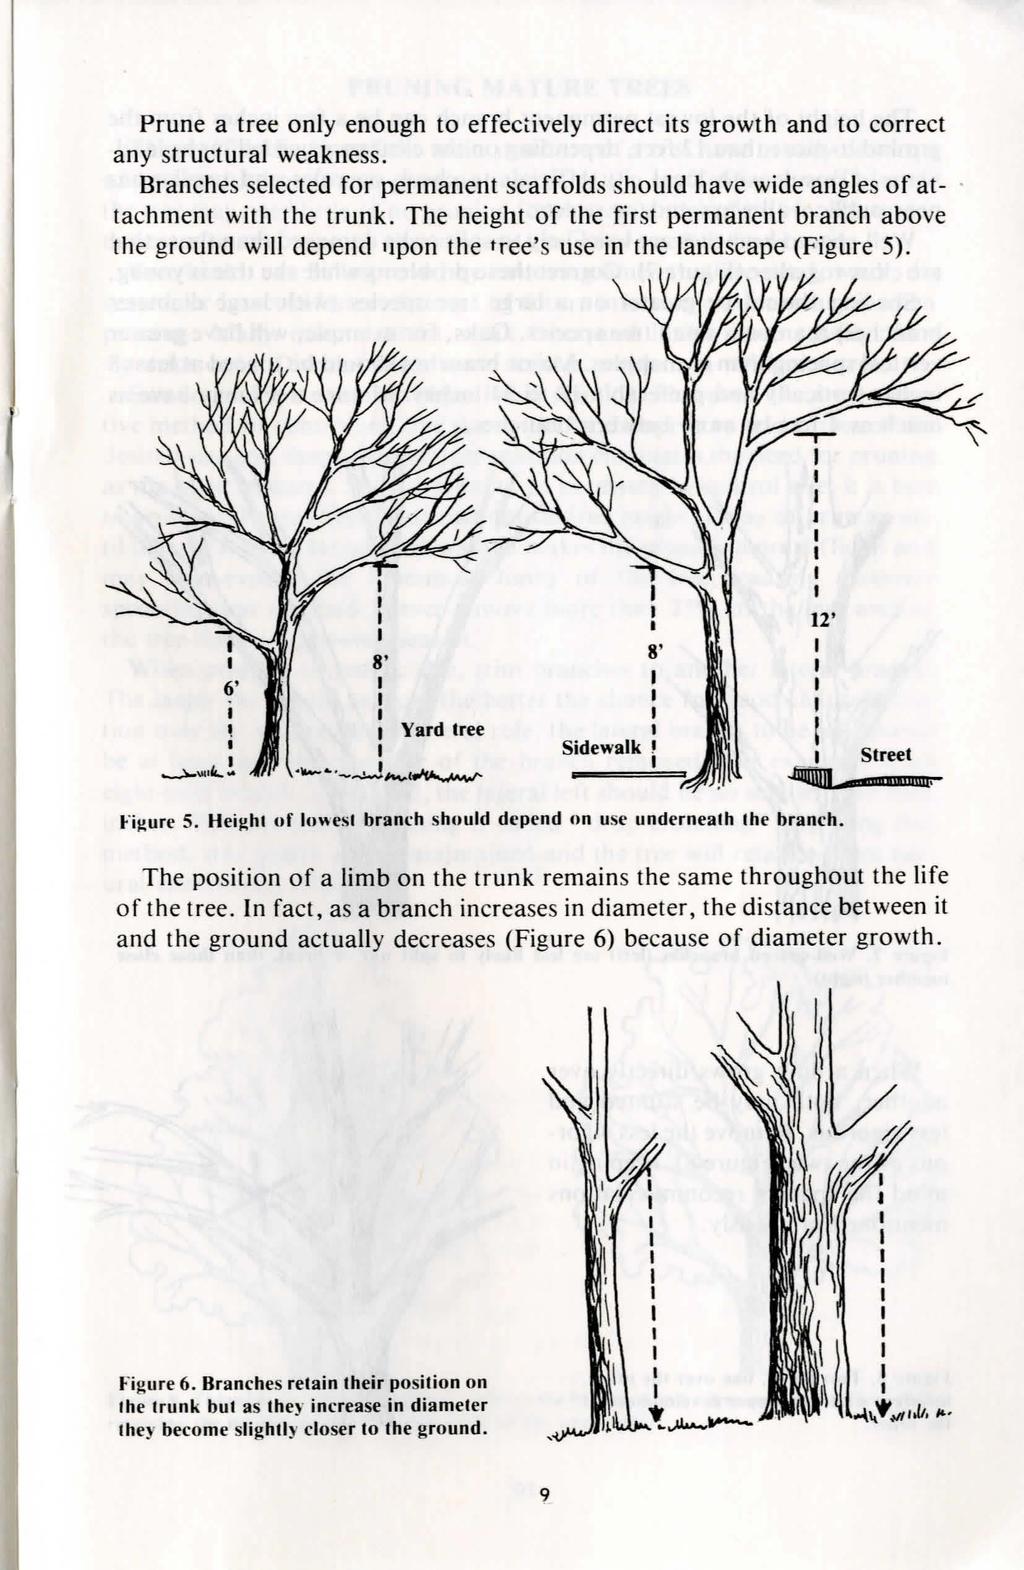 Prune a tree only enough to effectively direct its growth and to correct any structural weakness. Branches selected for permanent scaffolds should have wide angles of attachment with the trunk.